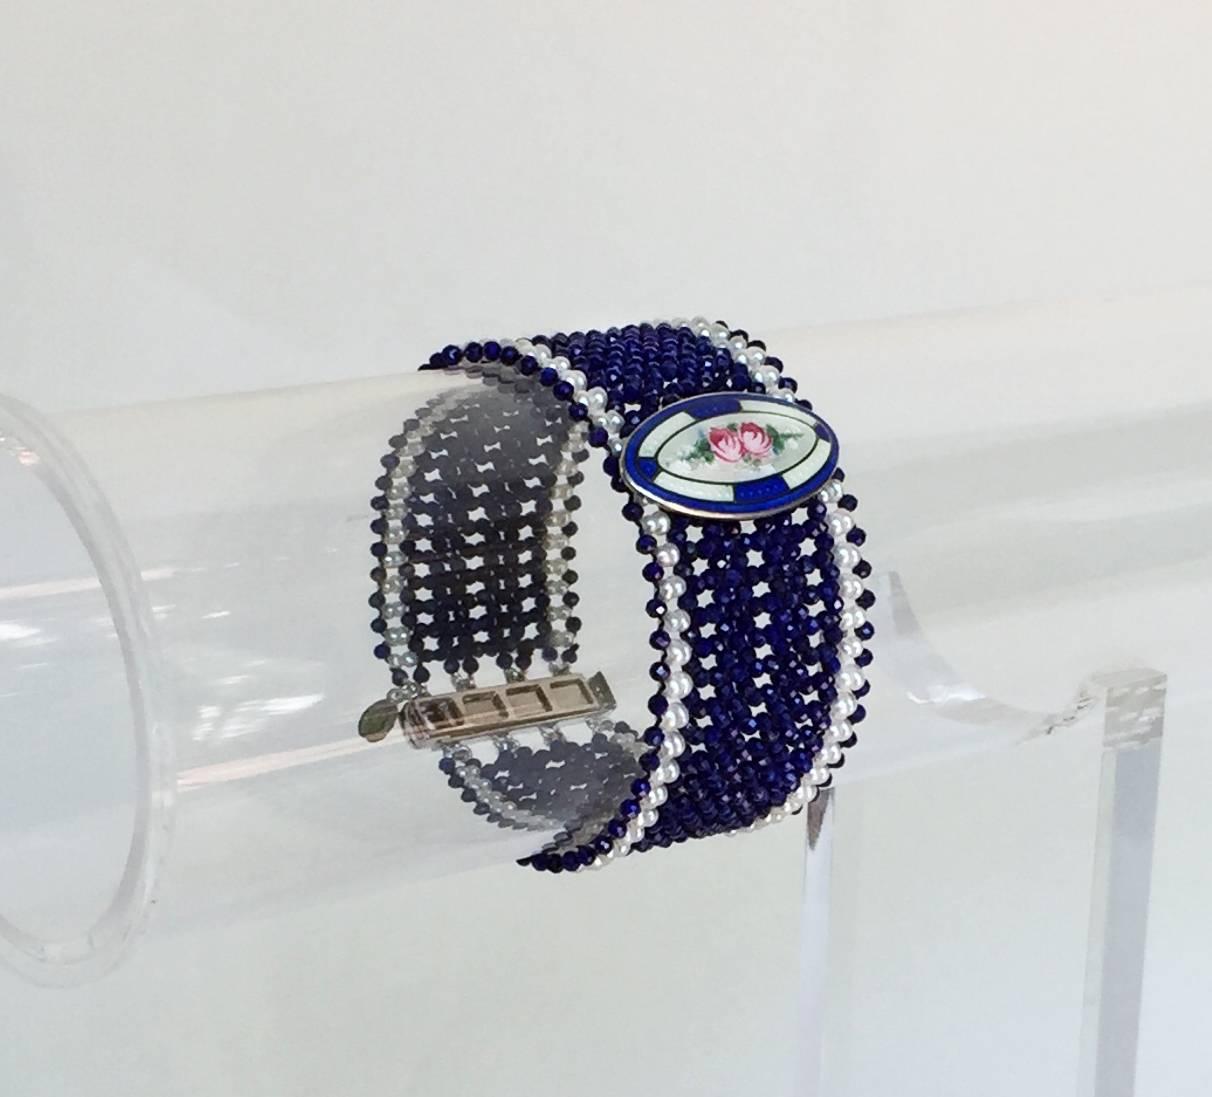 The beautiful and delicate enamel brooch is redesigned as the centerpiece of this elegant band bracelet. Tiny 1.5 mm pearls are delicately hand-woven with 1-2 mm lapis lazuli faceted beads creating a design and artistry reminiscent of a bygone era.